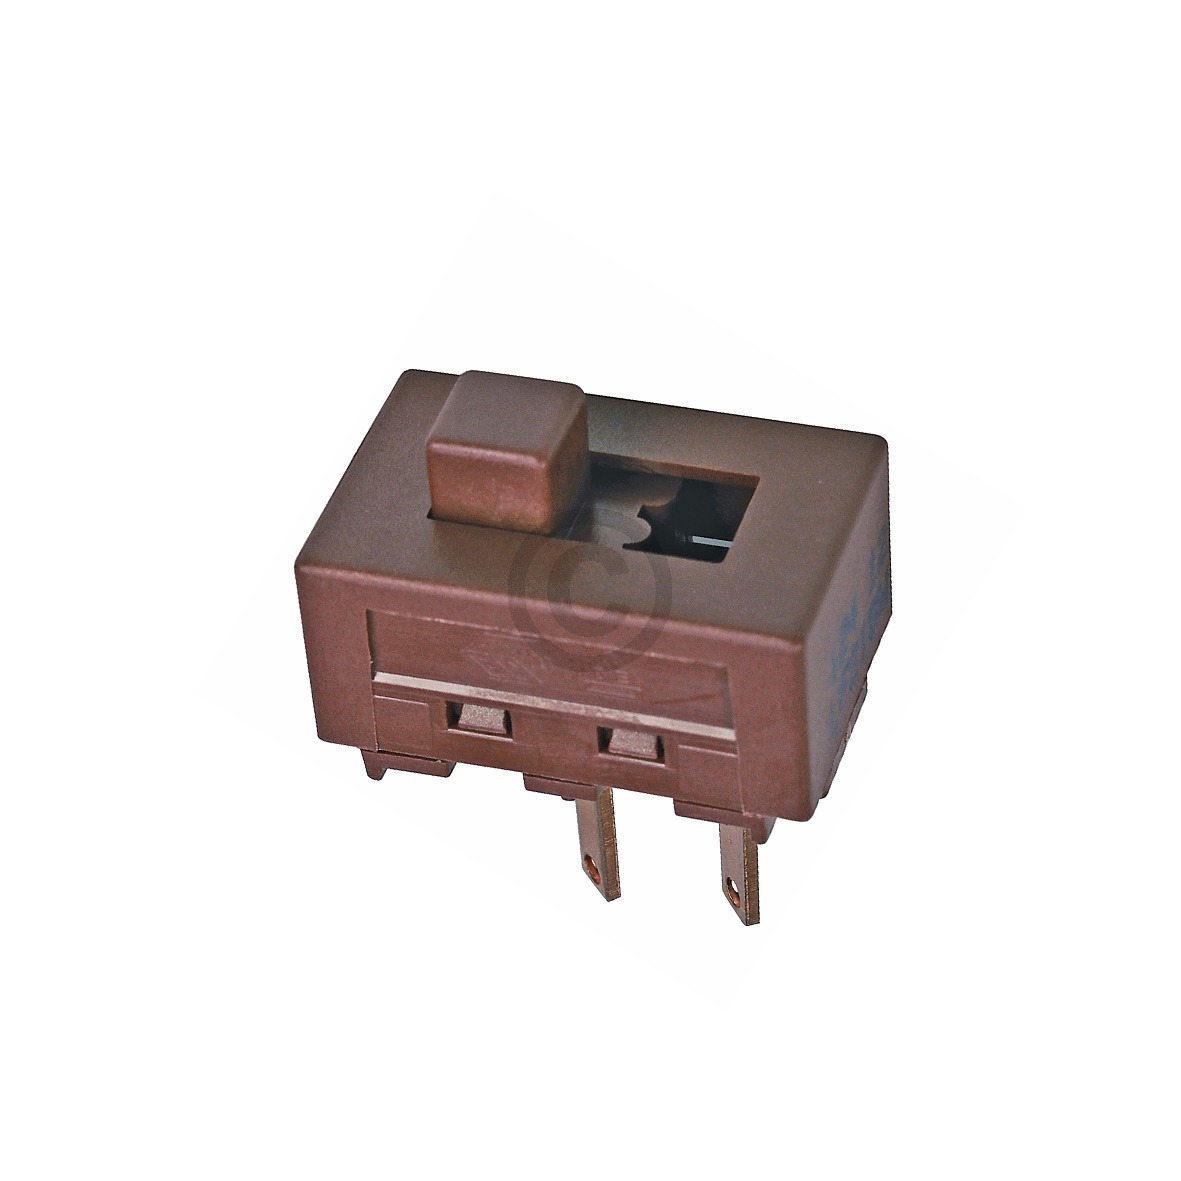 DC 5355 SW COOKER